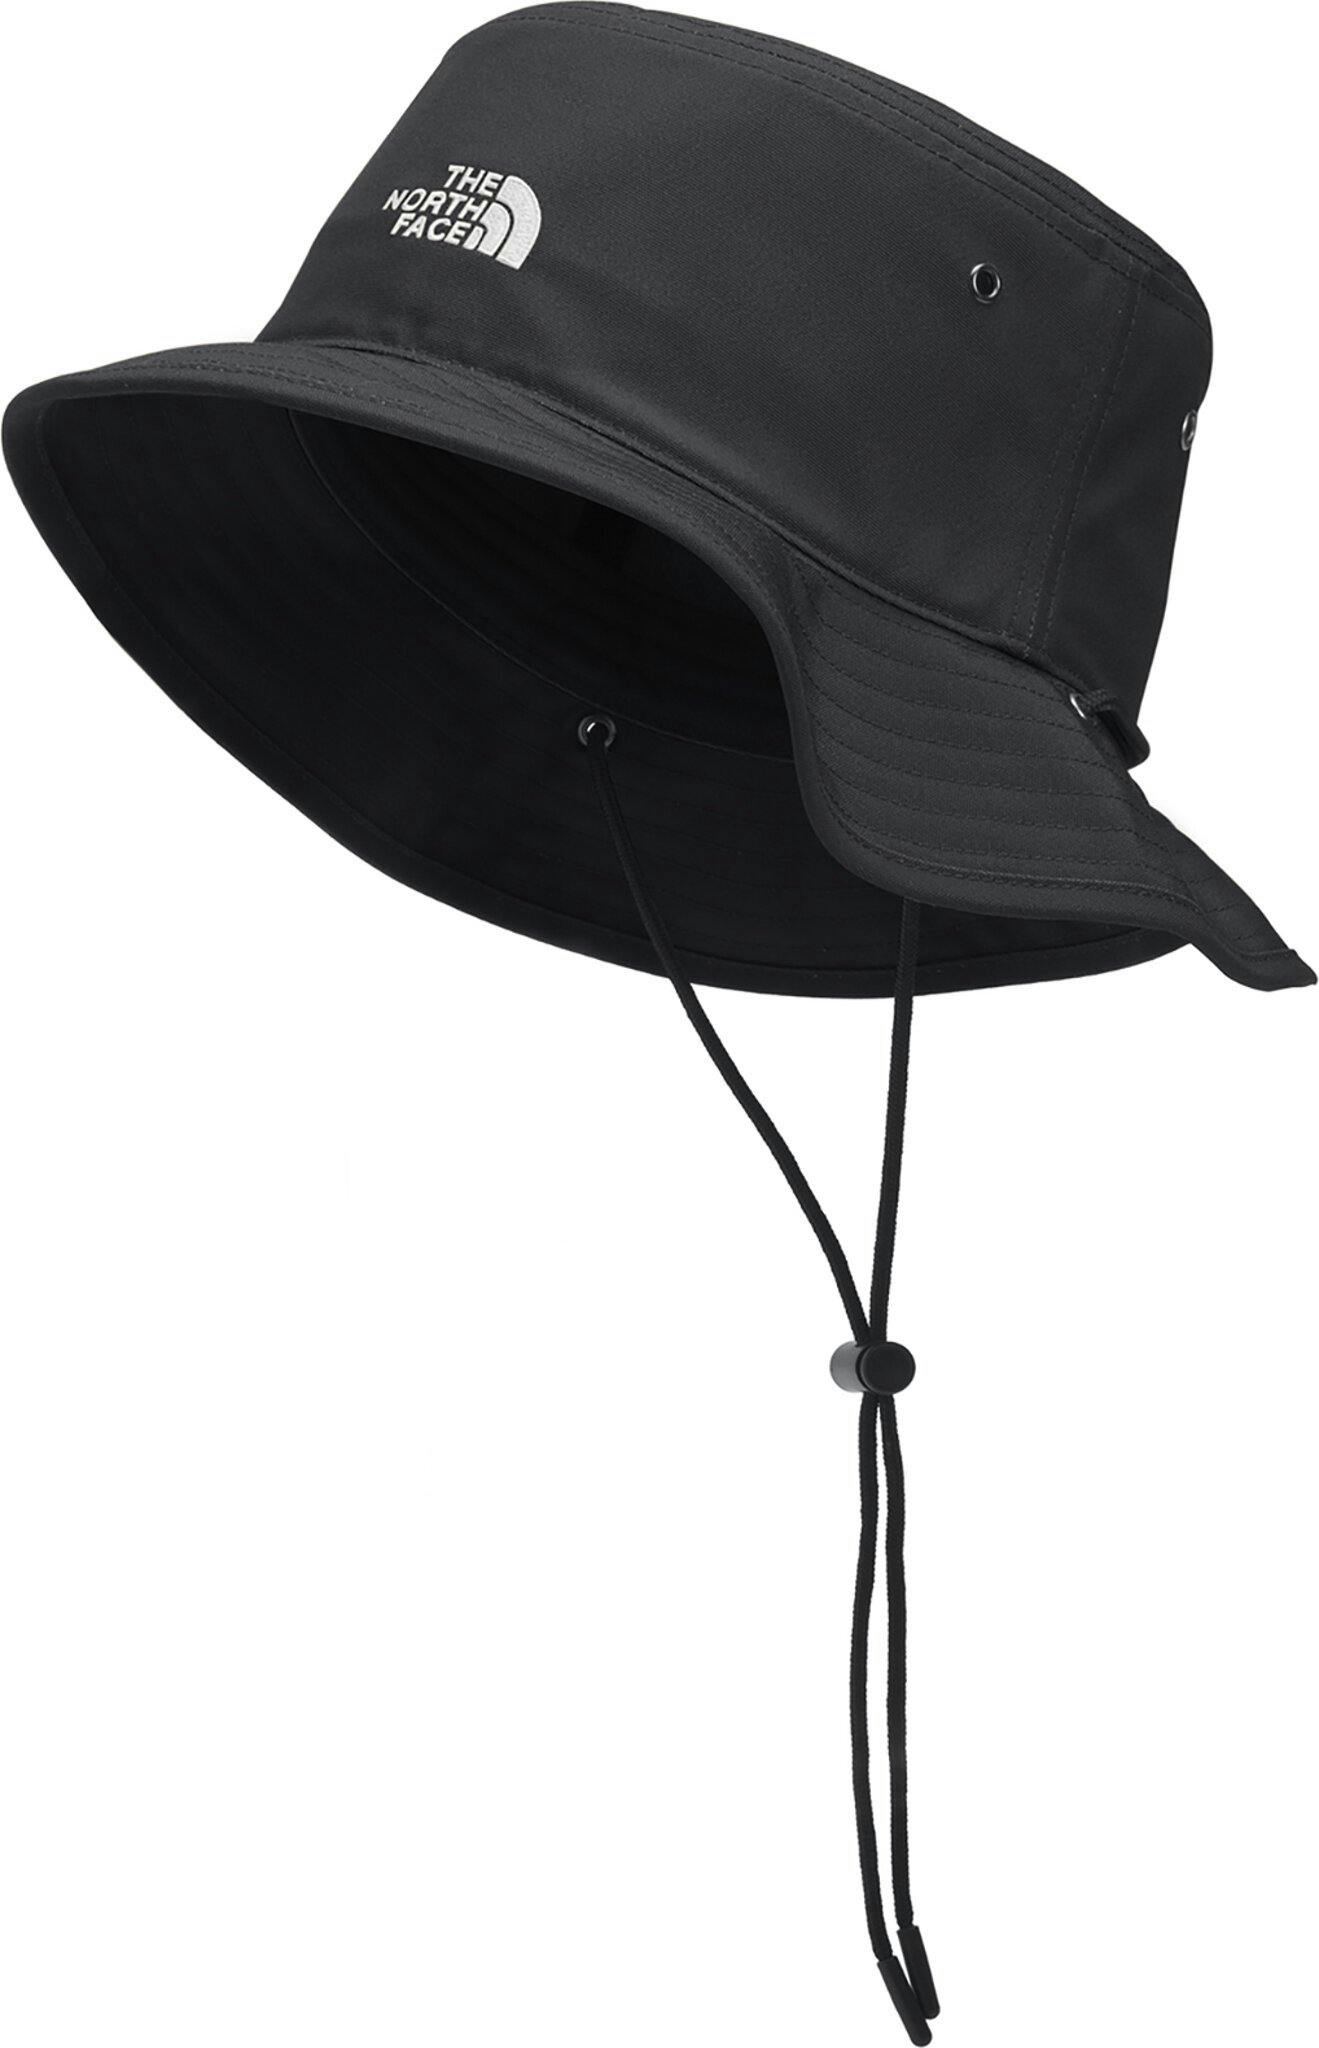 Product image for Recycled 66 Brimmer Hat - Unisex